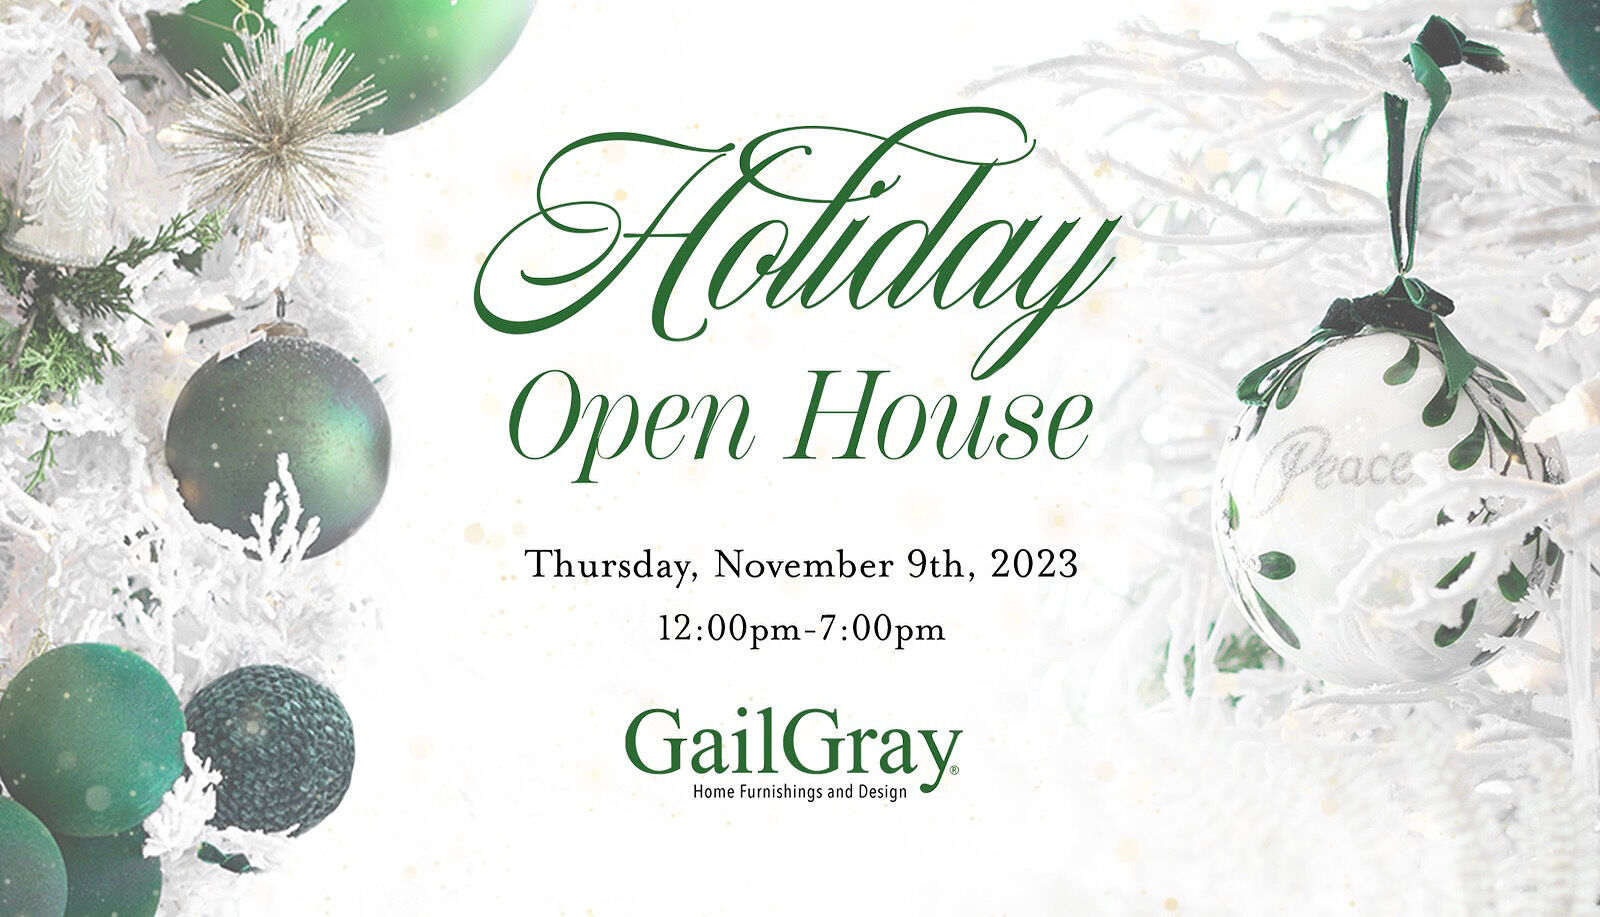 Gail Gray Holiday Open House Event